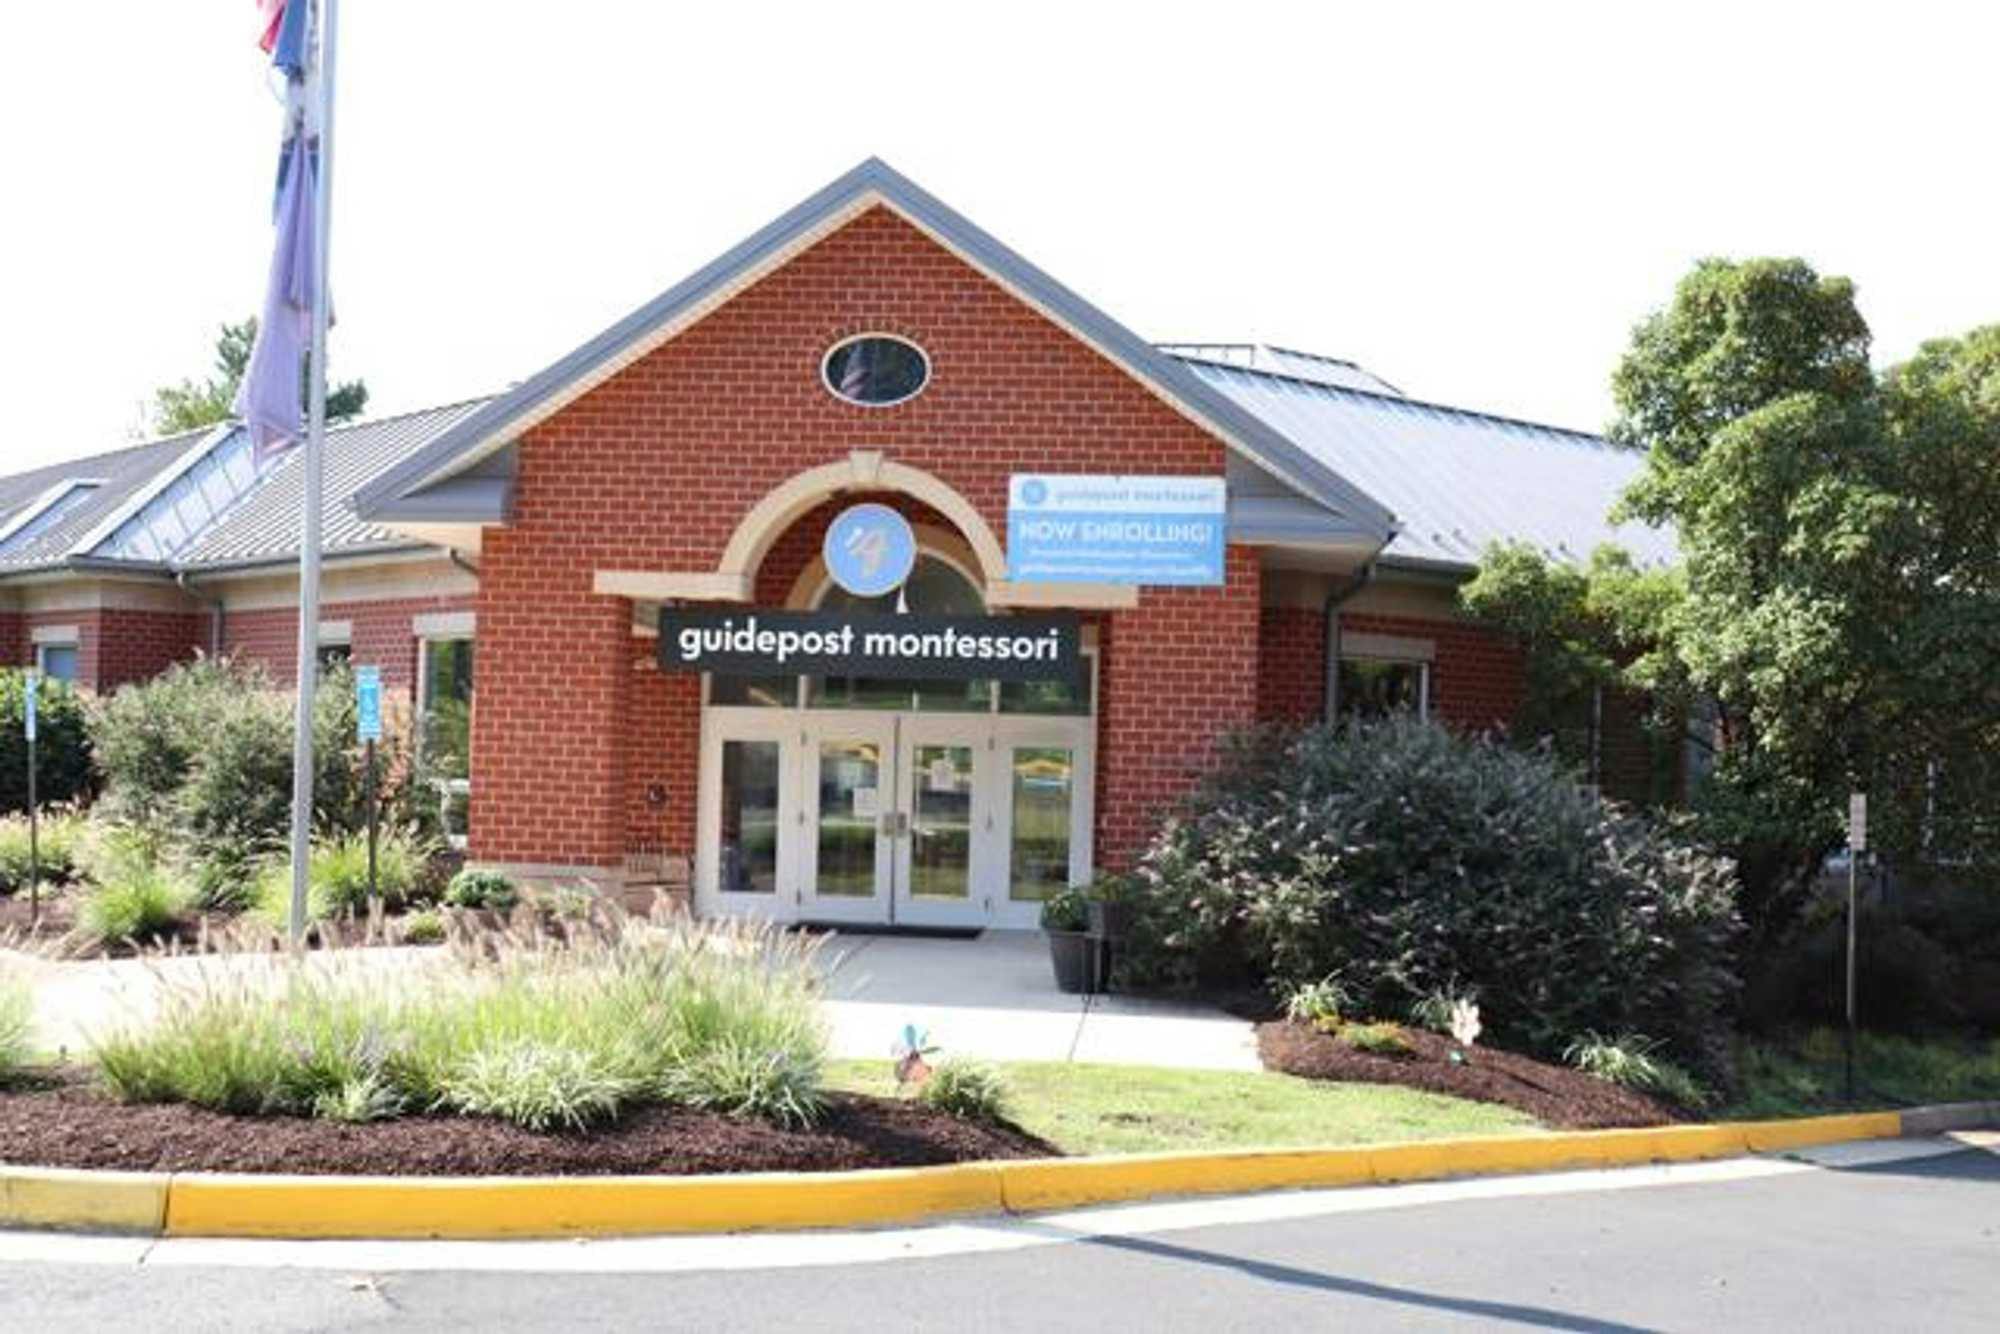 View of Guidepost Montessori at Chantilly from the parking lot that shows the brick exterior and entrance with four glass doors. A branded Guidepost montessori sign hangs above the entrance. There is a flagpole out front as well as plants and shrubbery, Trees with dark green leaves loom off screen on the right hand side. 